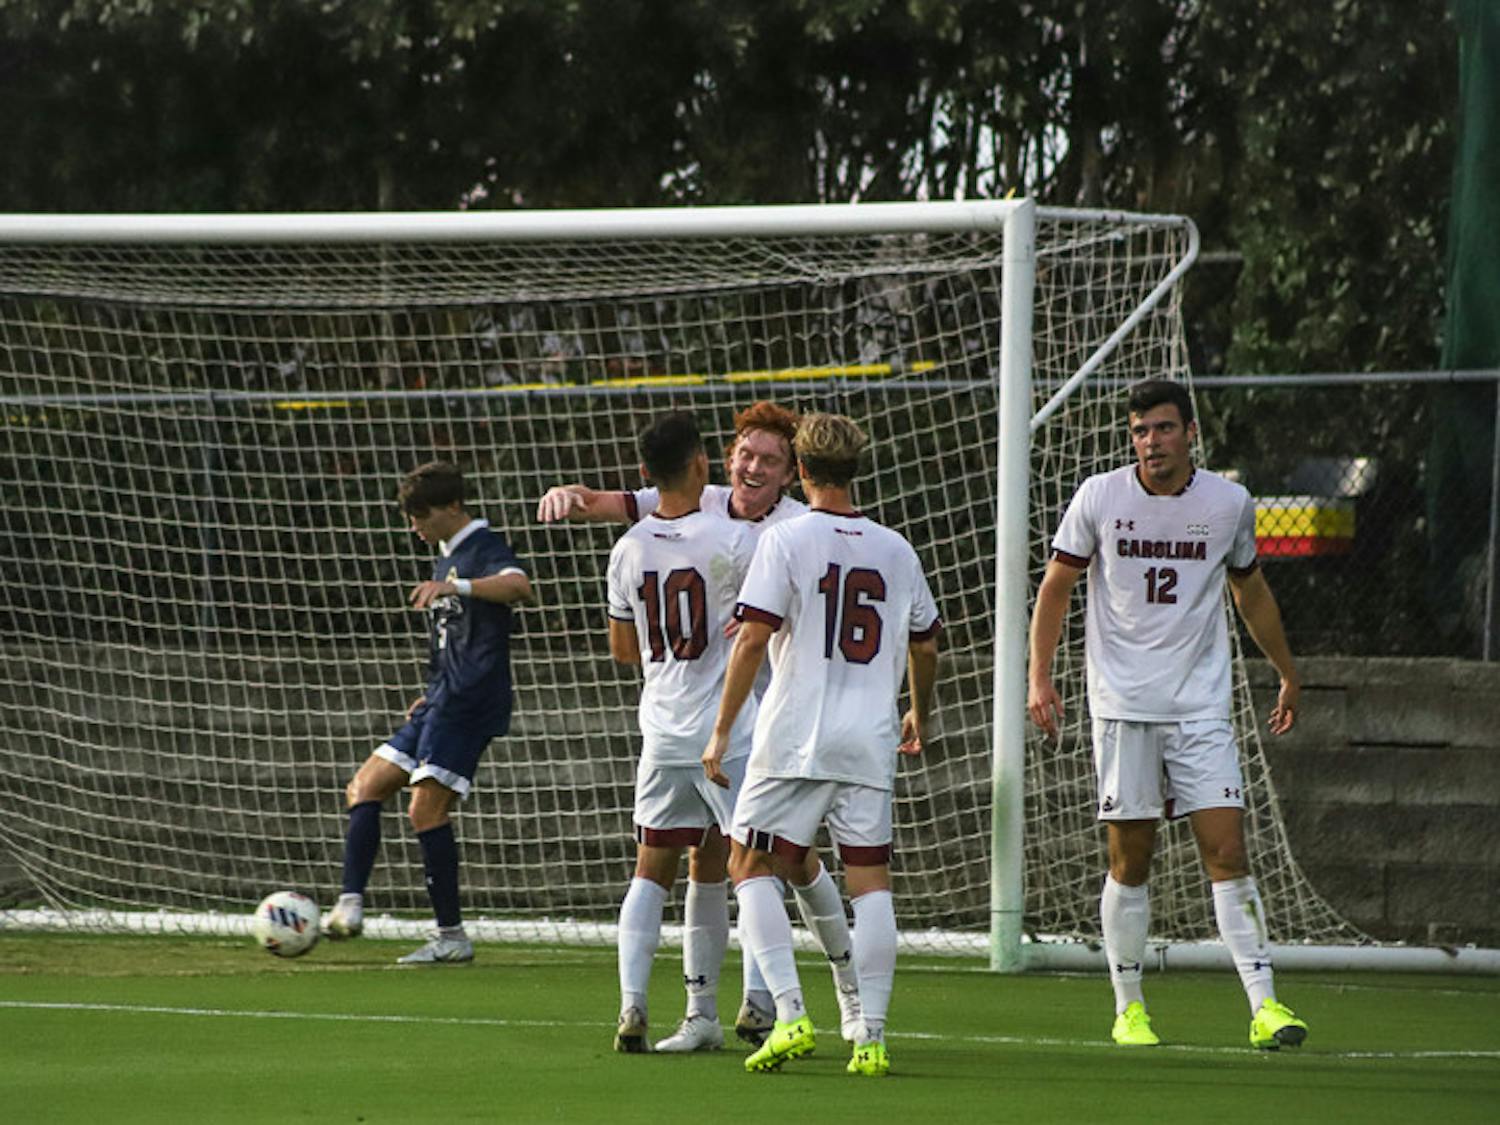 Teammates congratulate junior forward Adam Luckhurst after he makes a goal. Luckwurst scored two out of three points for South Carolina on Sept. 20, 2022. The Gamecocks beat Queens University 3-1.